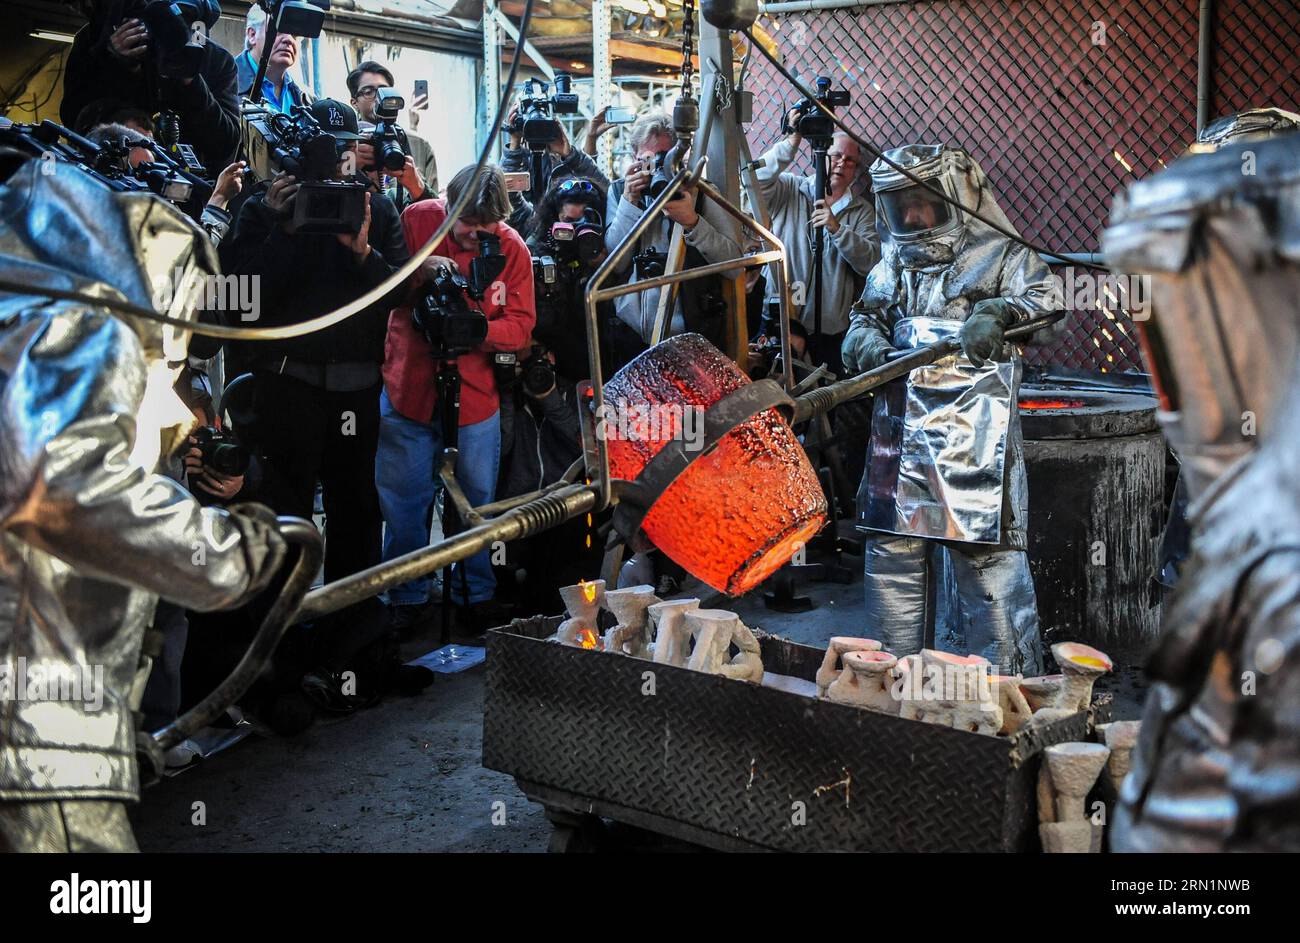 BURBANK, Jan. 13, 2015 -- Workers pour molten bronze into molds during a media event to display the production of the bronze statuette awards for the 21st annual Screen Actors Guild (SAG) Awards in Burbank, California, the United States, on Jan 13, 2015. The statuette, known as The Actor , was originally designed by Jim Heimann and Jim Barrett, and sculpted by Edward Saenz. It is 16 inches (40.6 cm) tall and weighs 12 pounds (5.4 kg). Since the 1st SAG Awards in 1995, the awards have been produced by the American Fine Arts Foundry in Burbank. The 21st SAG Award ceremony will be held in Los Ang Stock Photo